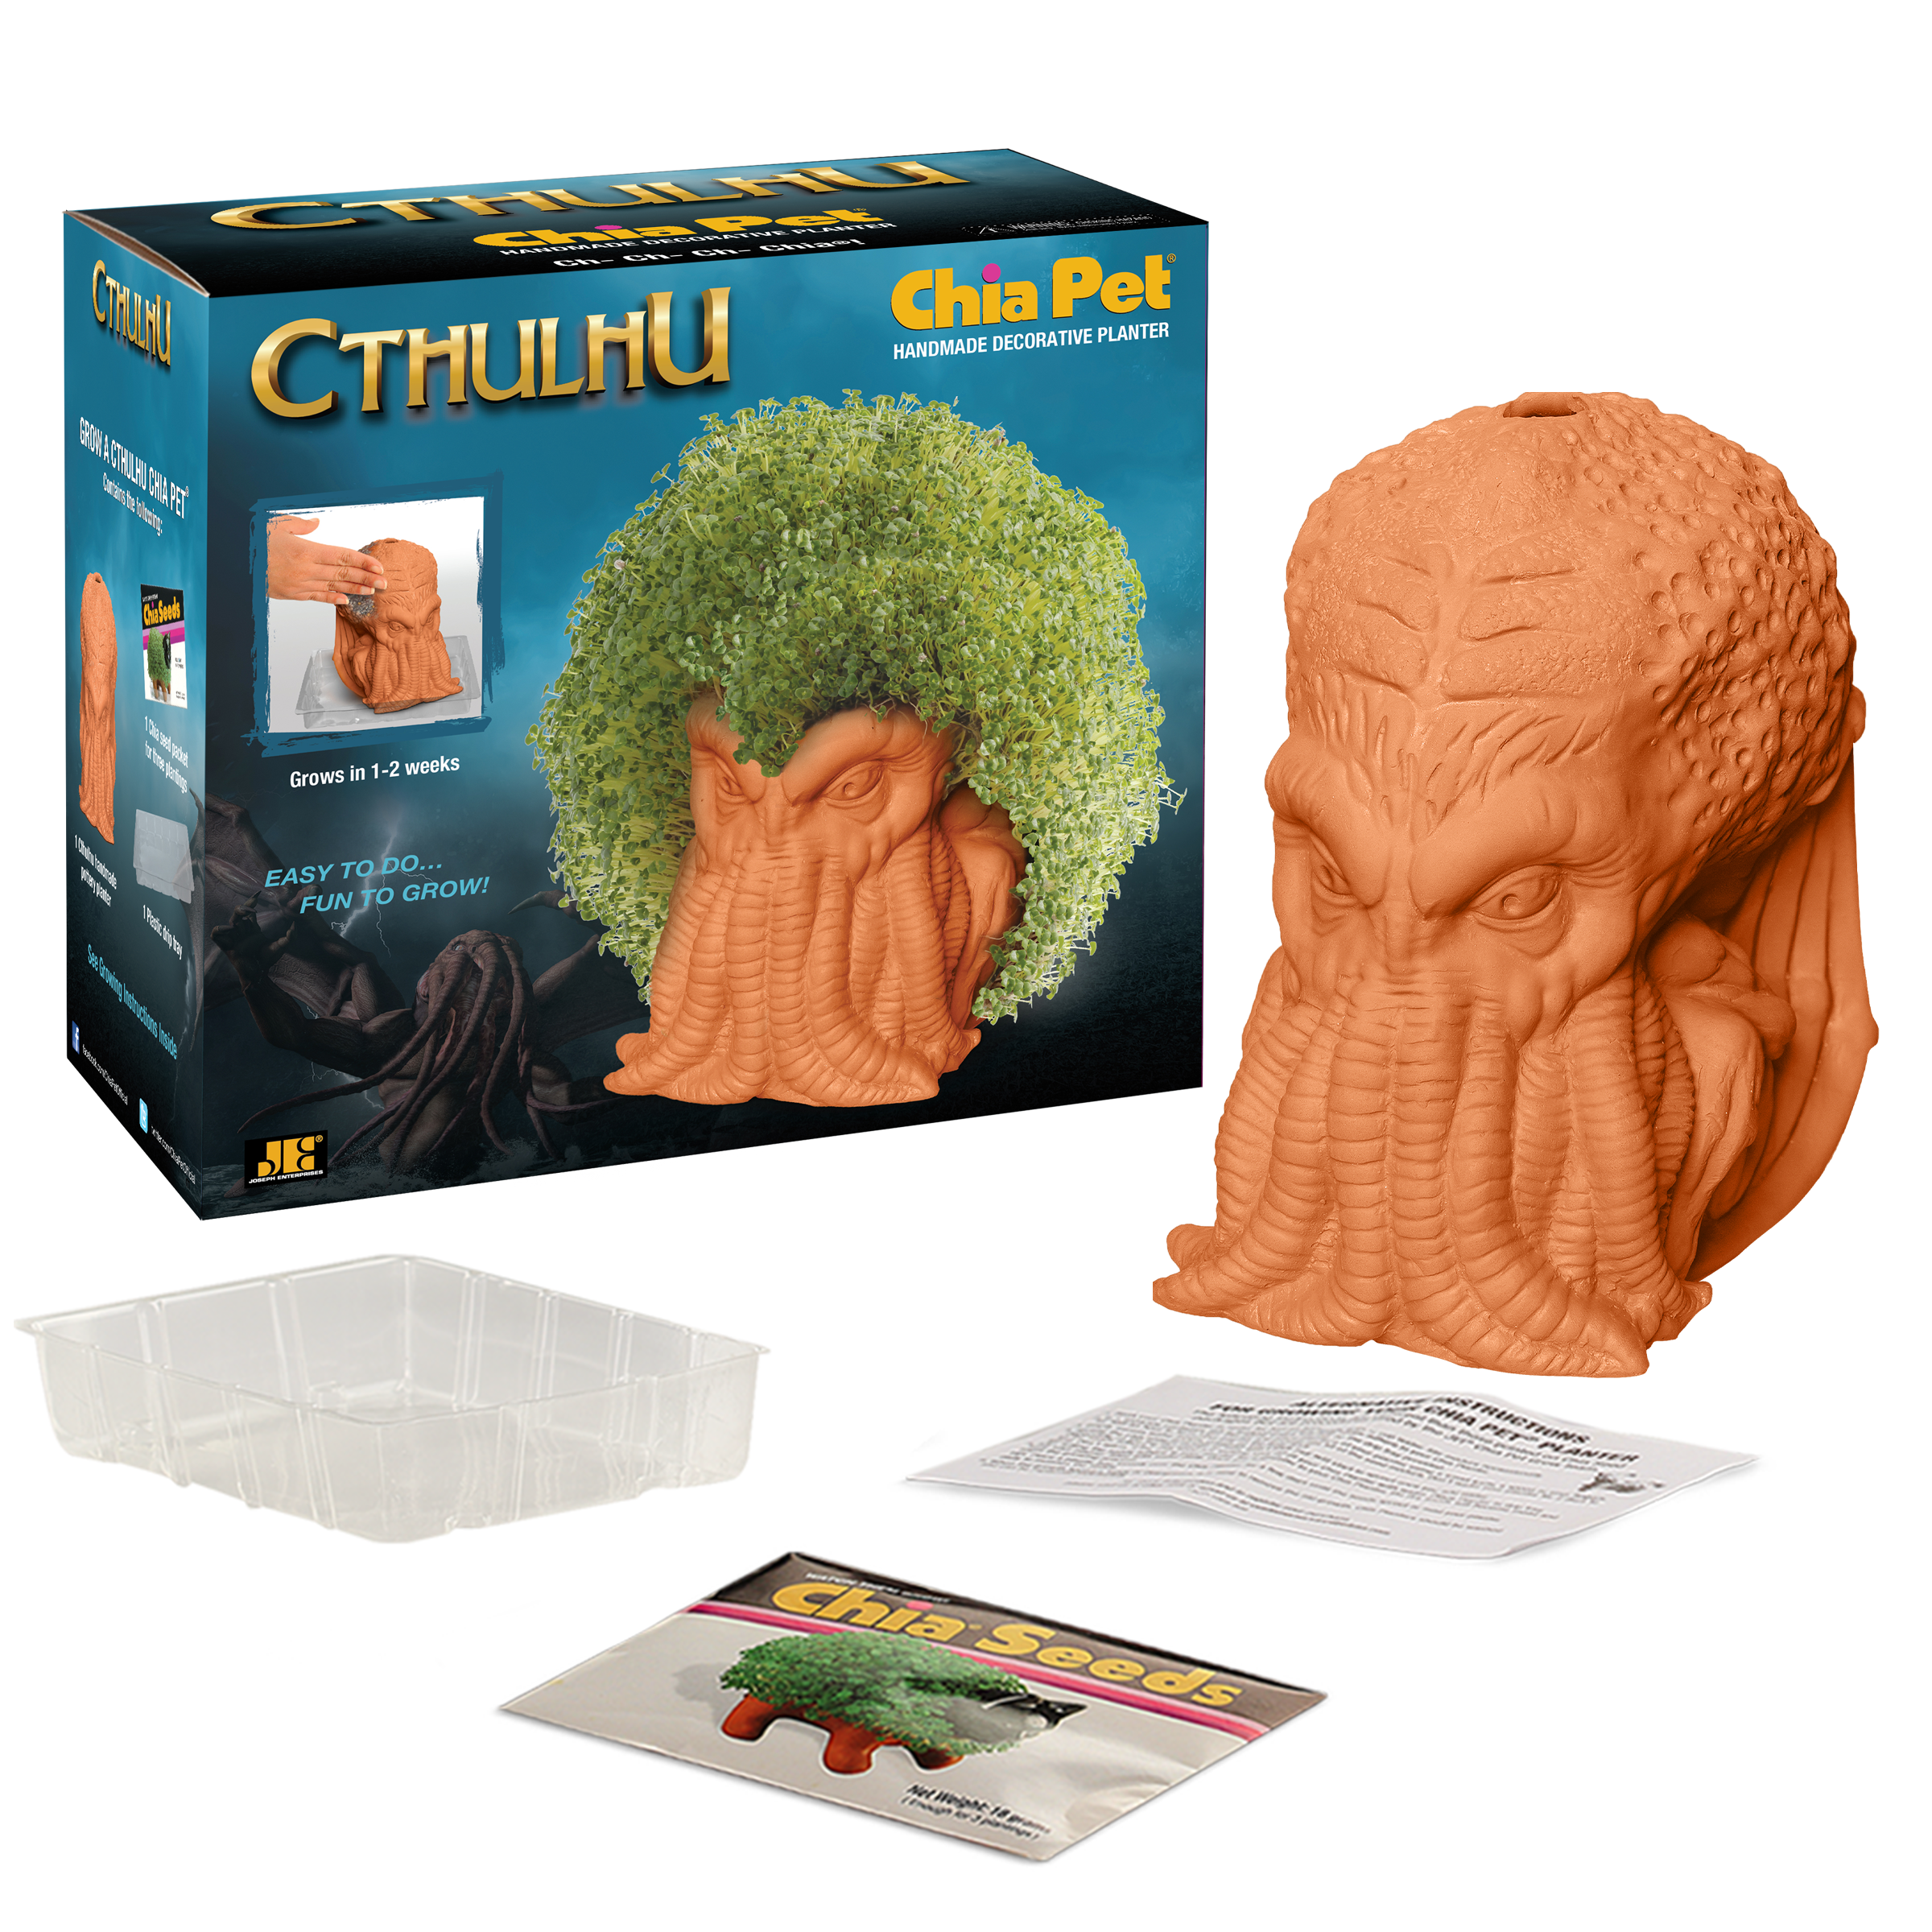 Cthulhu Chia Pet® with box, drip tray, seed packet, and instructions